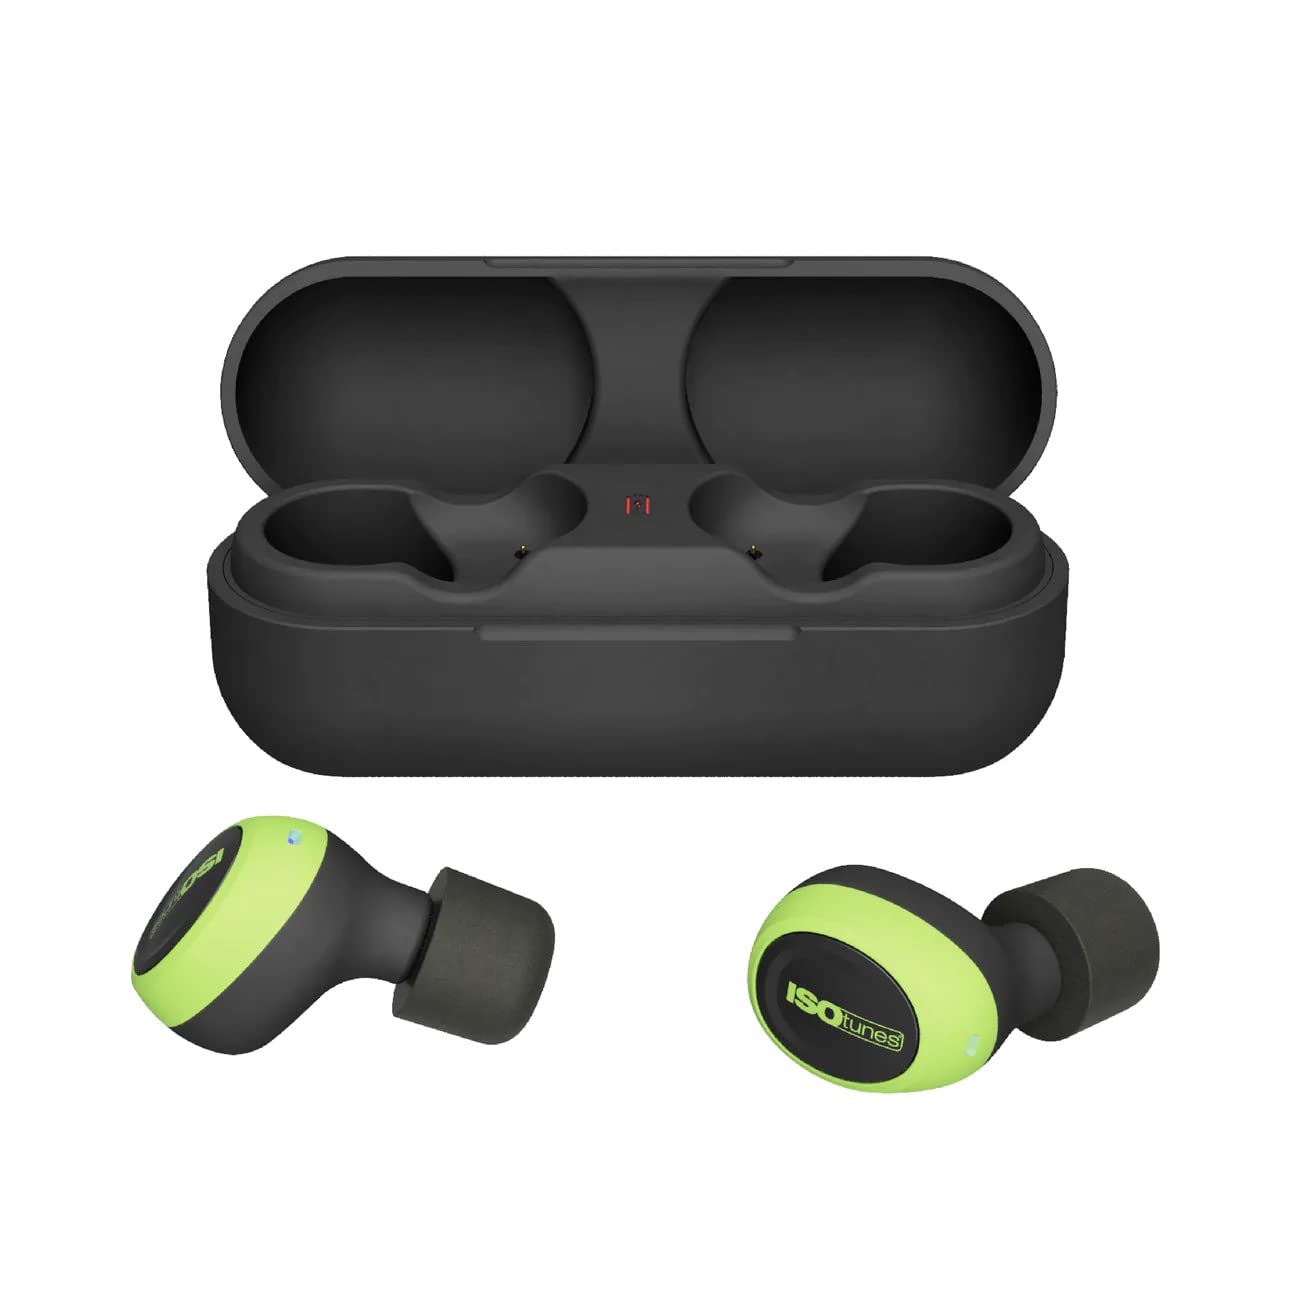 ISOtunes Free 2.0 True Wireless Earbuds: Improved 25 dB Noise Reduction Rating, 22 Hour Total Battery Life, Noise Cancelling Mic, OSHA Compliant Bluetooth Hearing Protector (Free 2.0 - Safety Green)